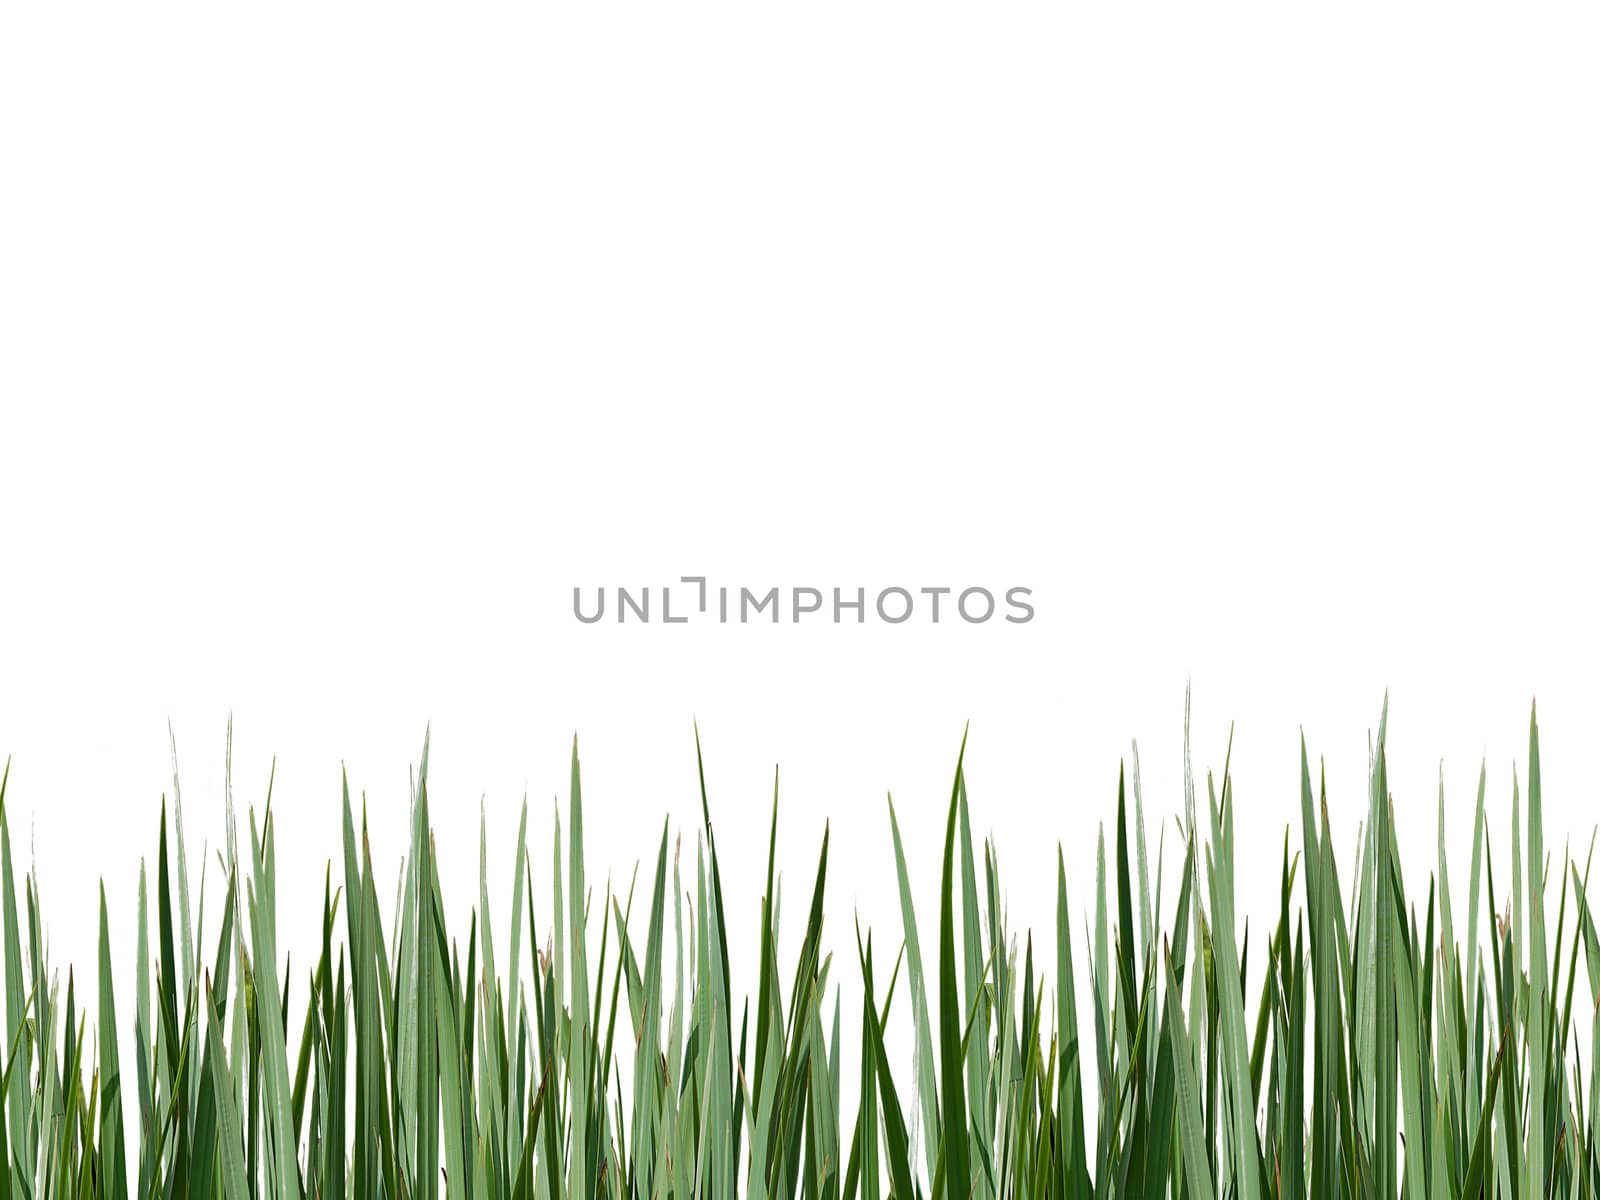 Green grass with some dry leaves against white background.